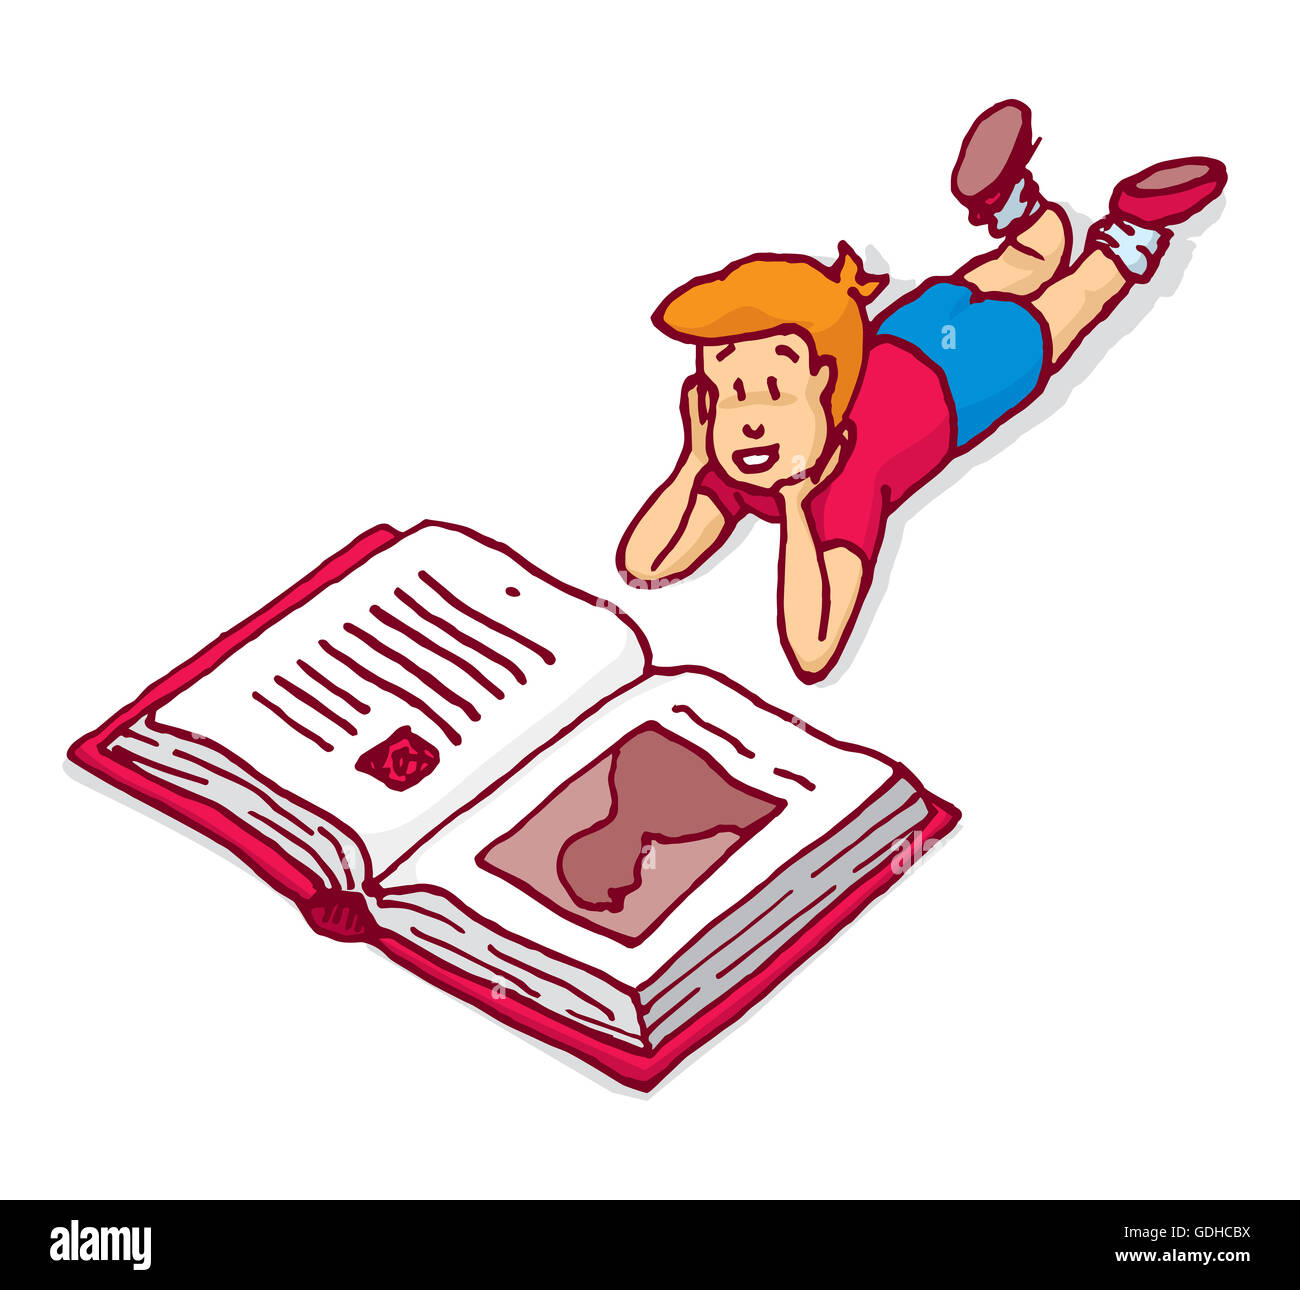 Cartoon illustration of interested child reading a big book Stock Photo